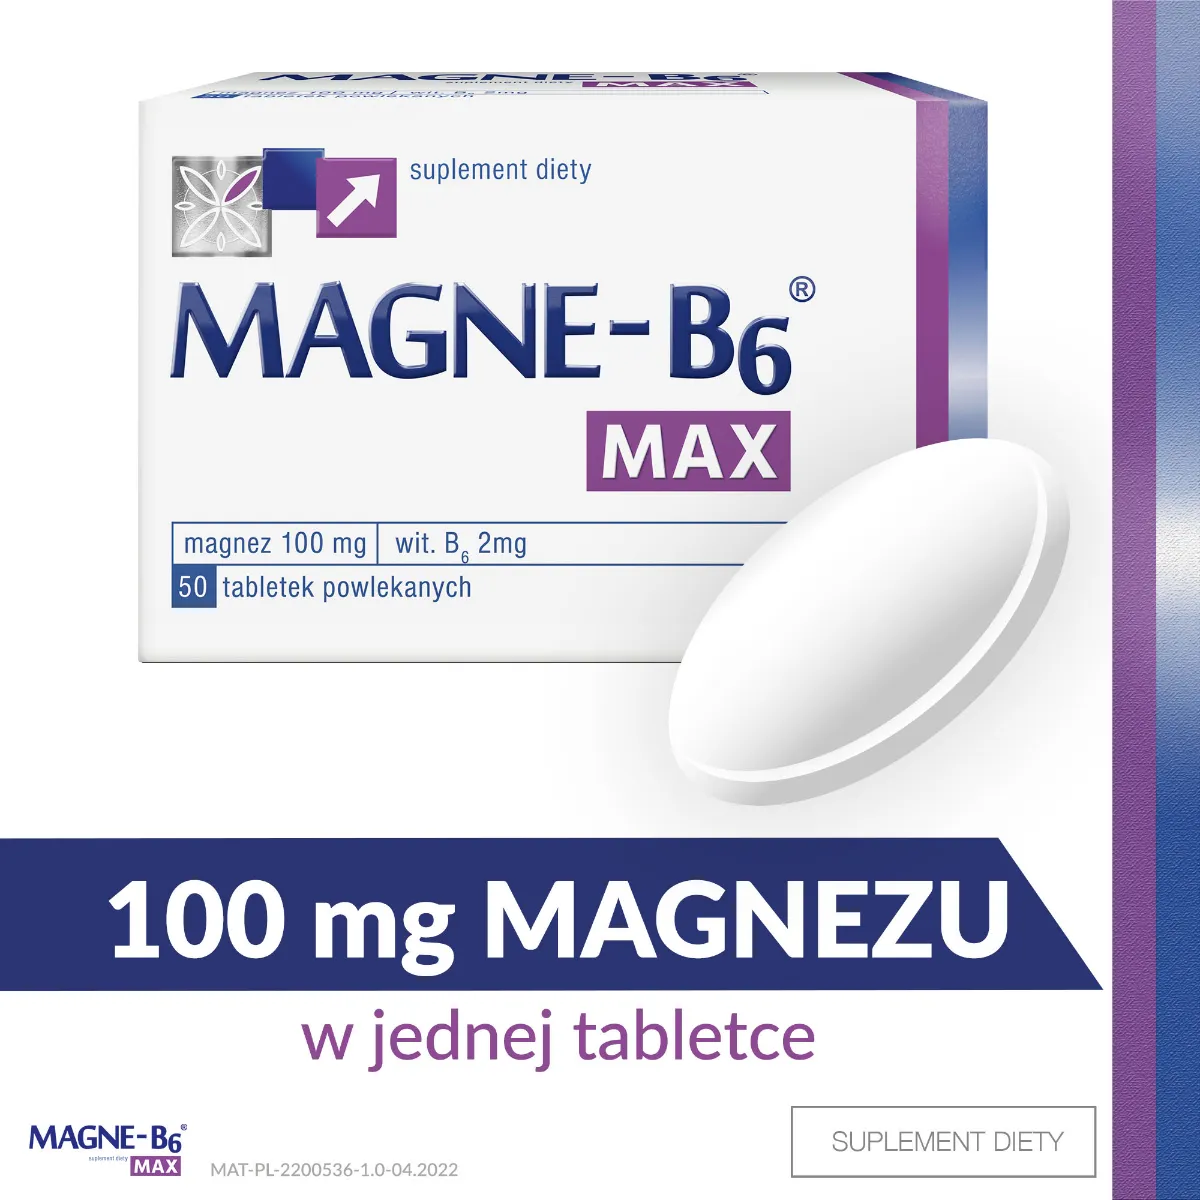 Magne-B6 MAX, magnez 100 mg, suplement diety, 50 tabletek powlekanych 